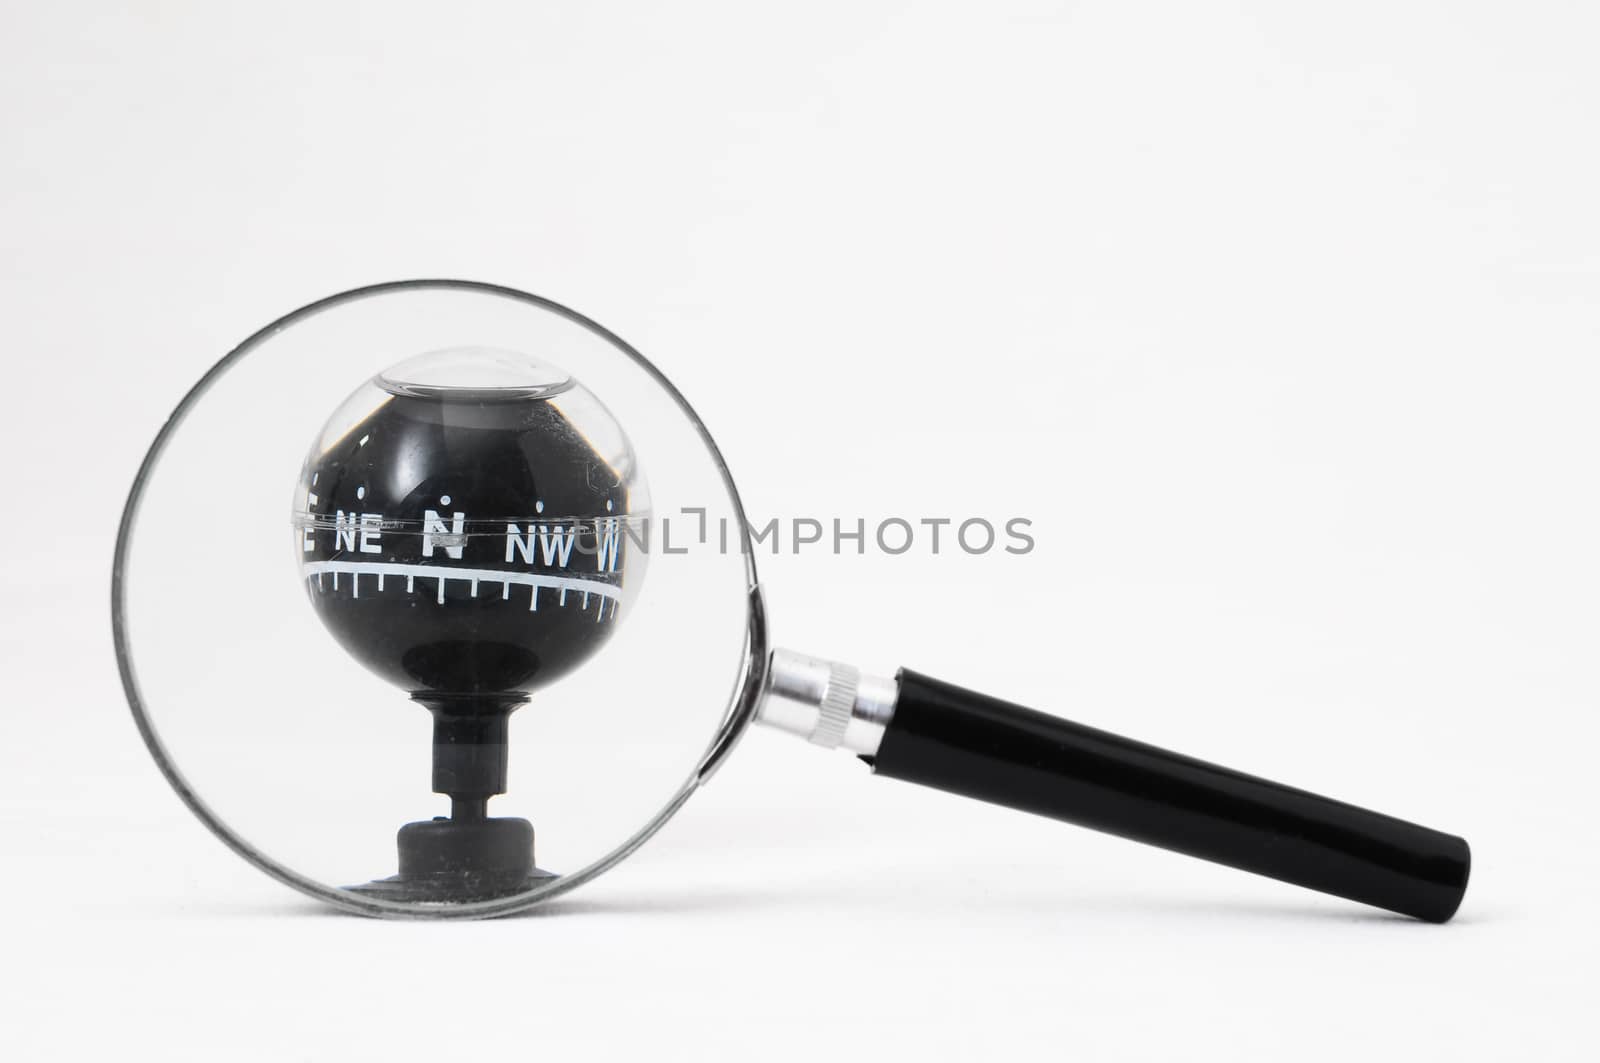 Orientation Concept - Analogic Compass and Loupe on a White Background